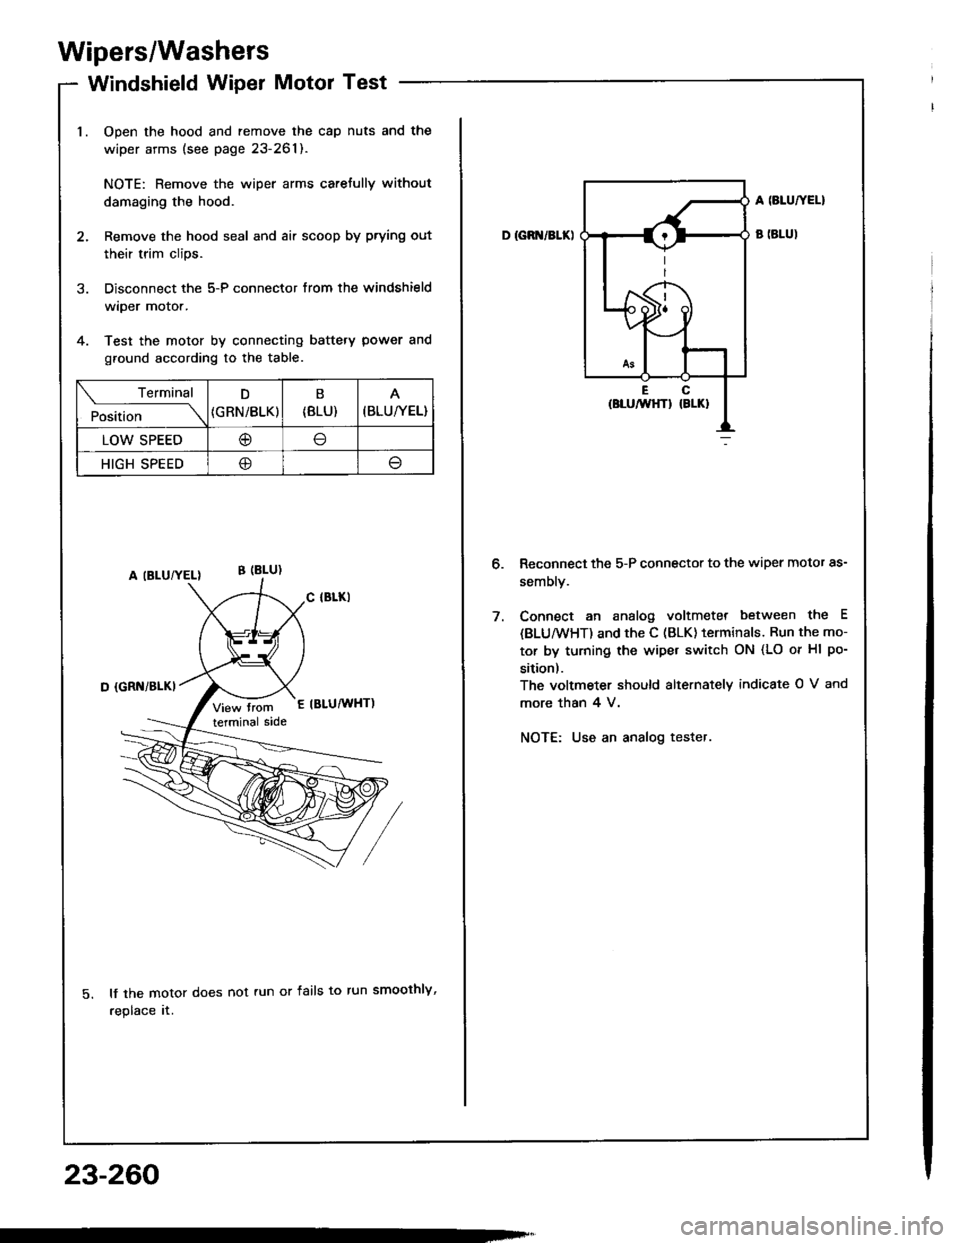 HONDA INTEGRA 1994 4.G Workshop Manual Wipers/Washers
Windshield Wiper Motor Test
Open the hood and remove the cap nuts and the
wiper arms (see page 23-261).
NOTE: Remove the wiper arms carefully without
damaging the hood.
Remove the hood 